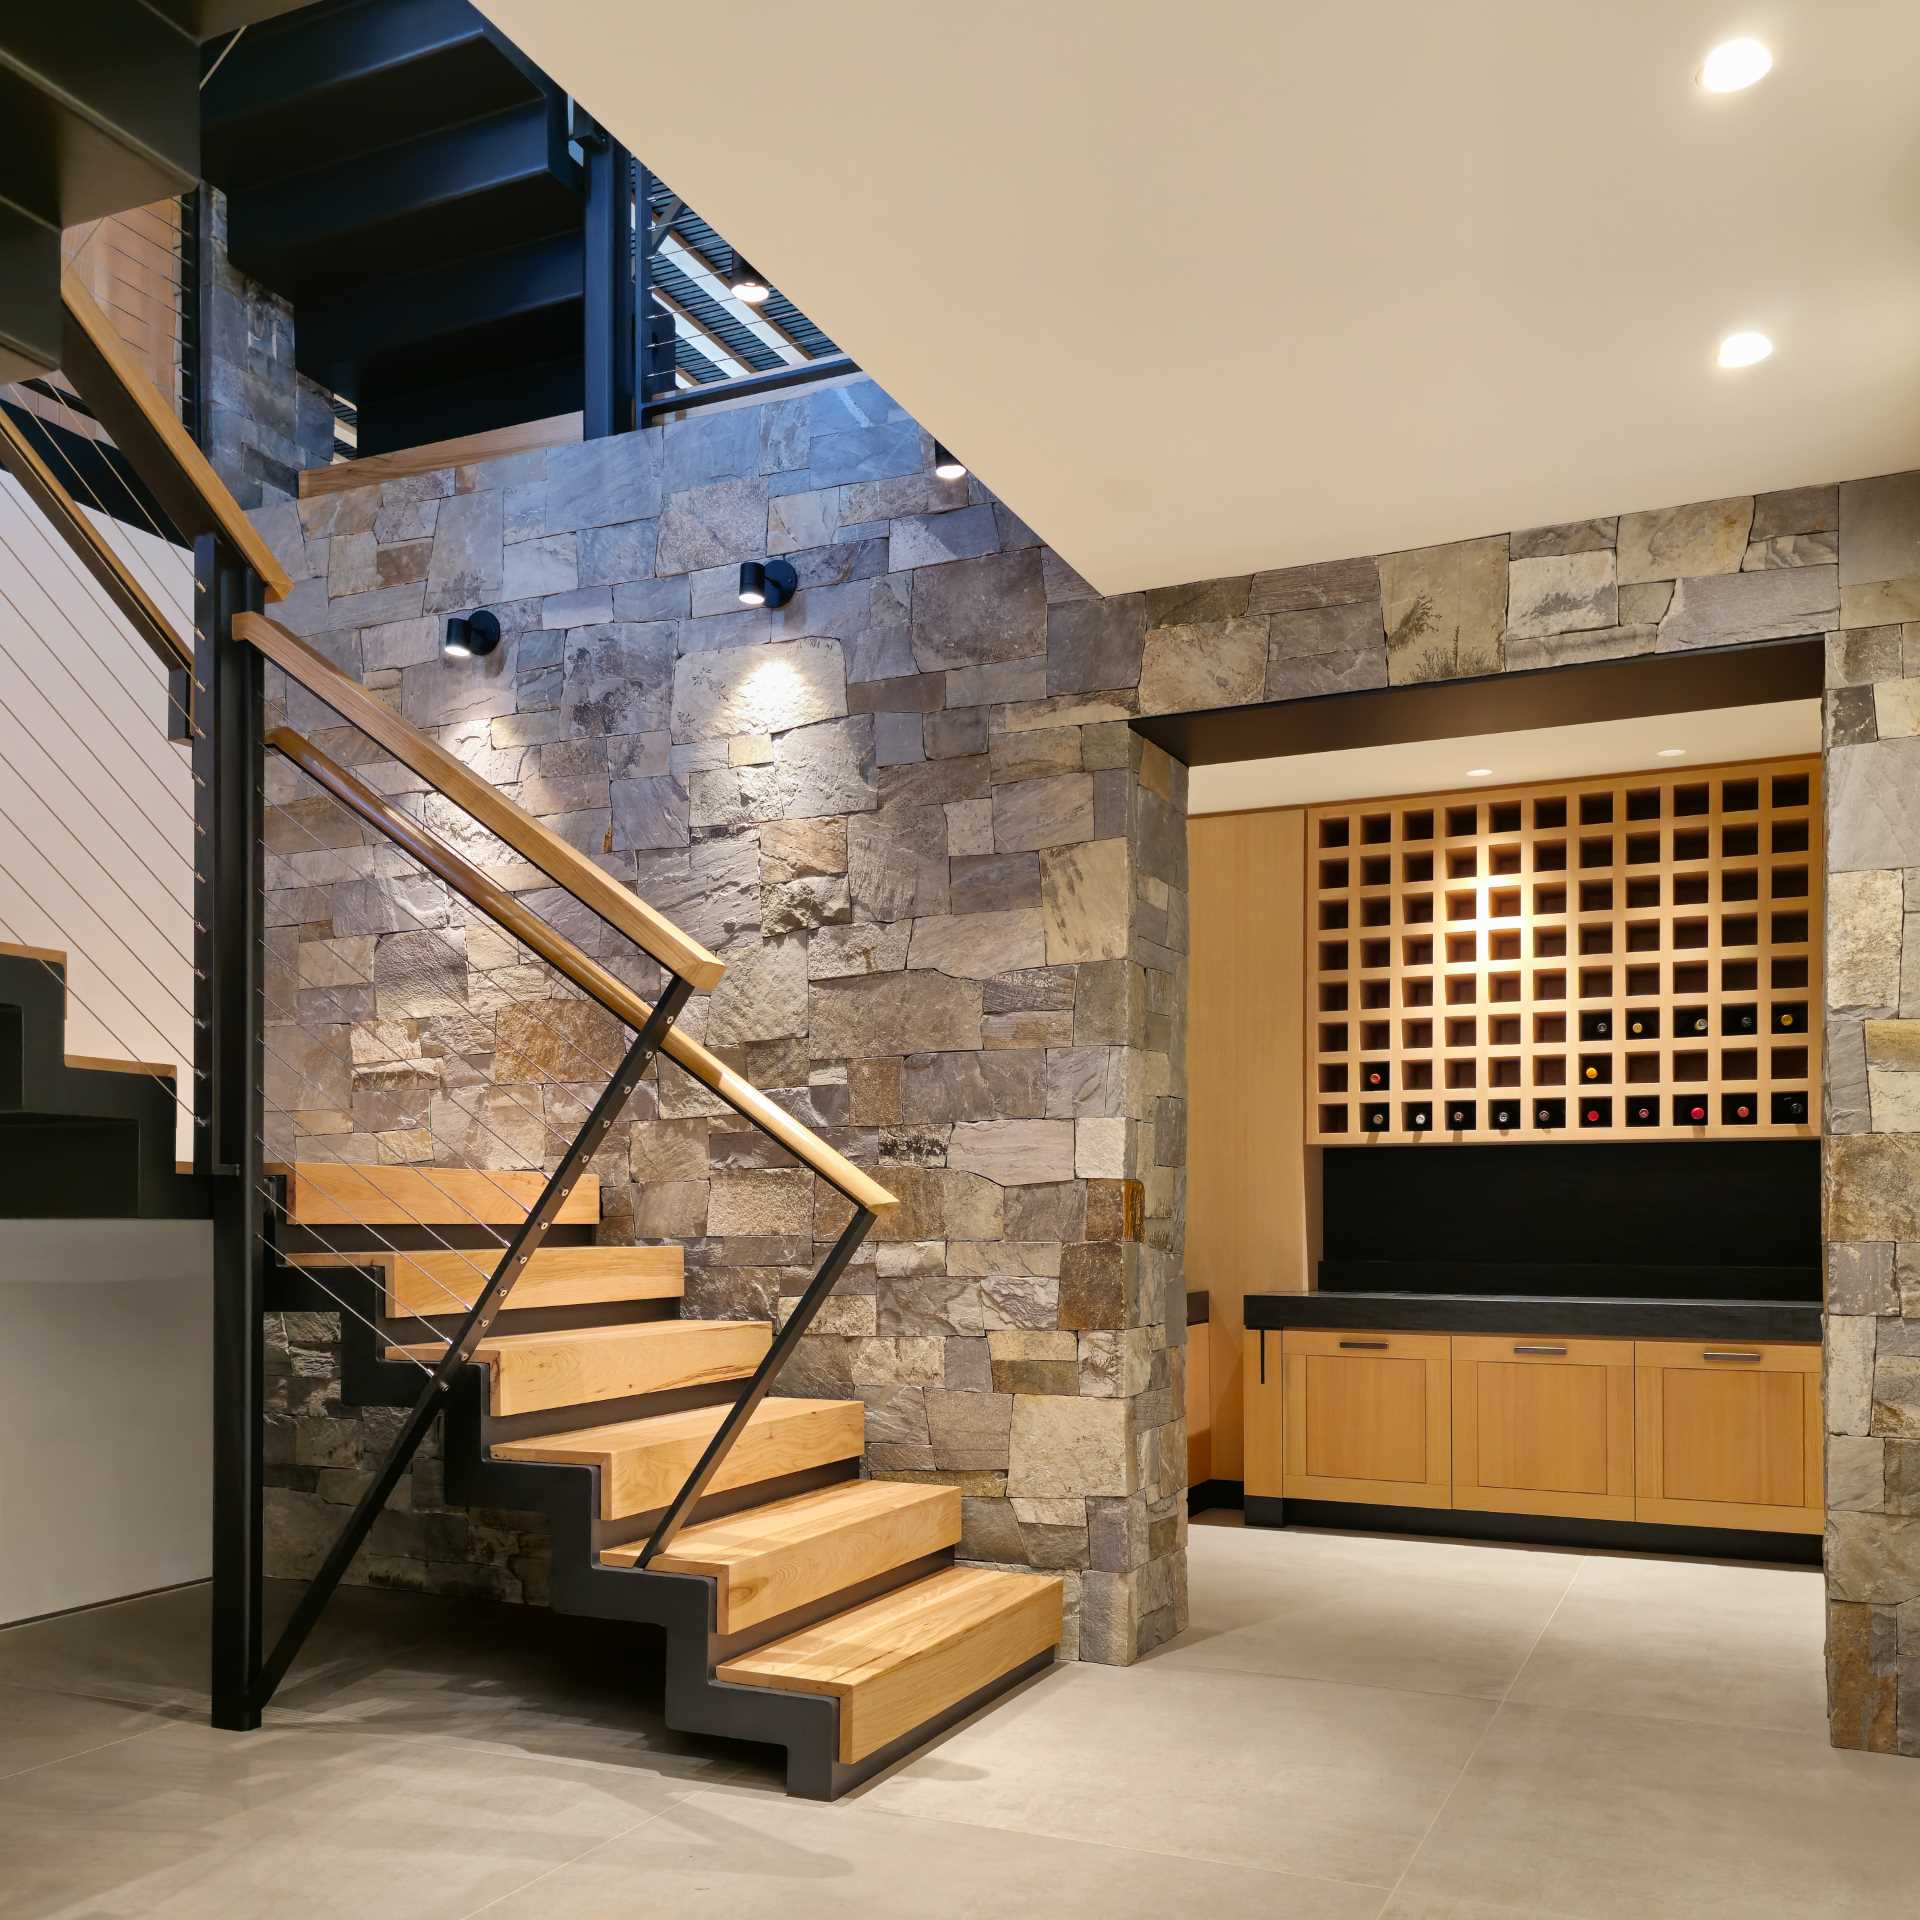 A modern ،me with steel and wood stairs, and a built-in wine rack.